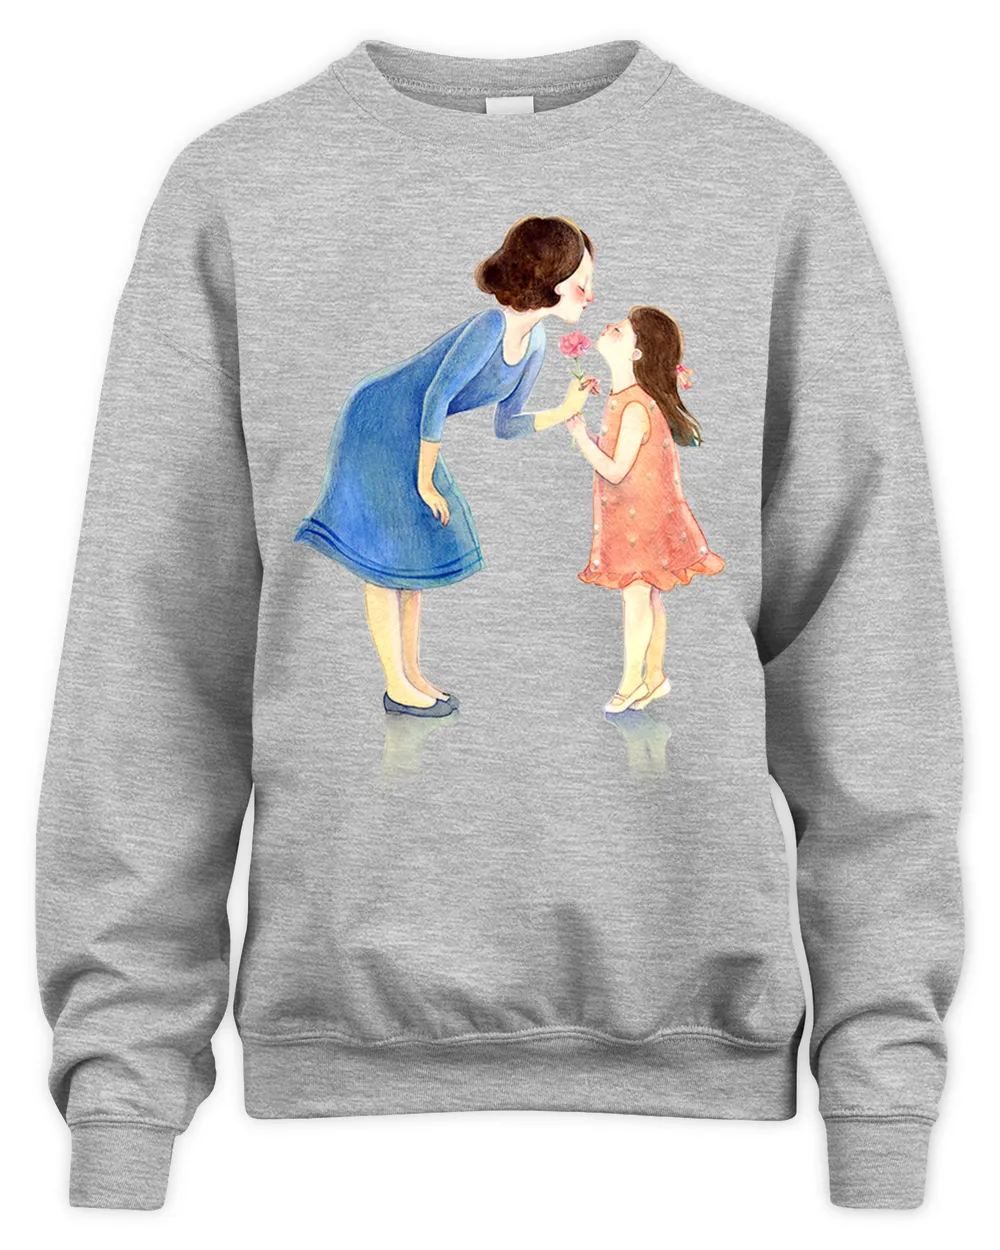 Mother's Day Long Slevee - Mother's Day Gift Father Daughter